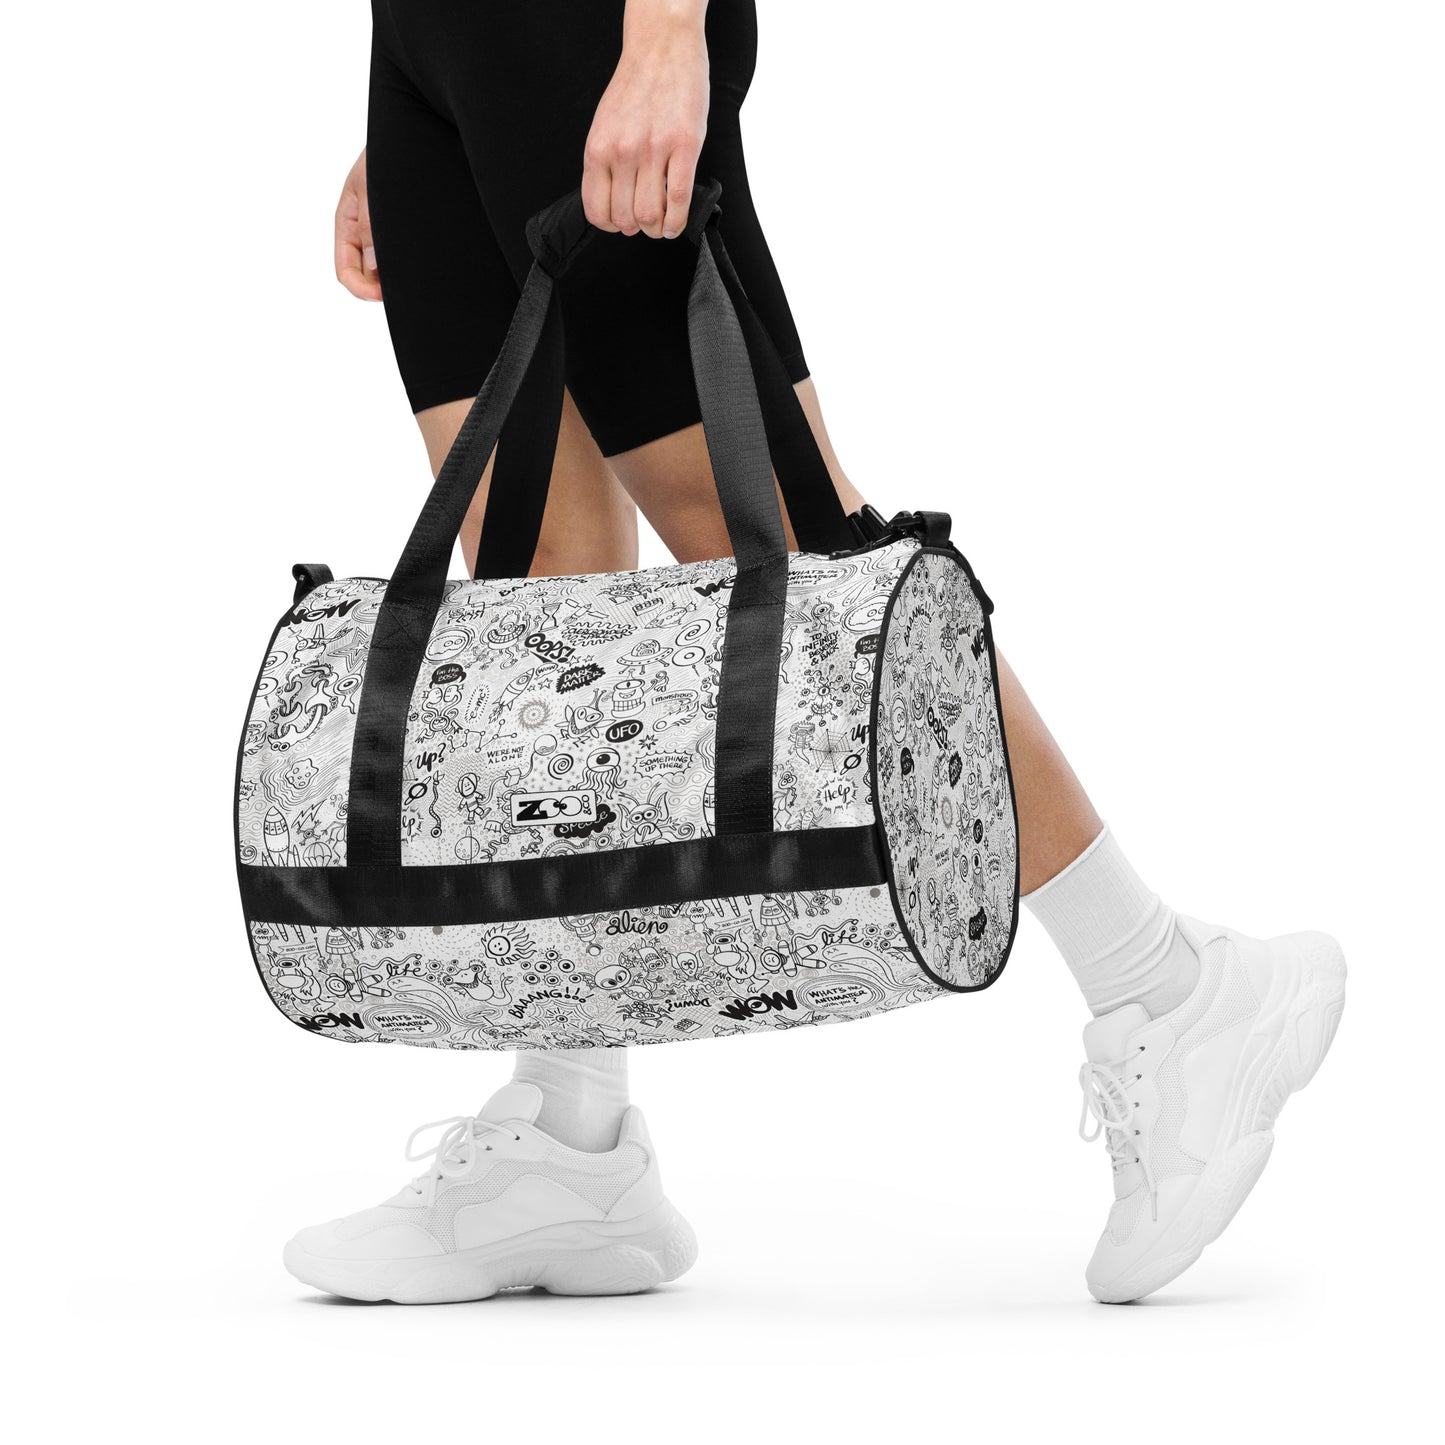 Celebrating the most comprehensive Doodle art of the universe All-over print gym bag. Lifestyle